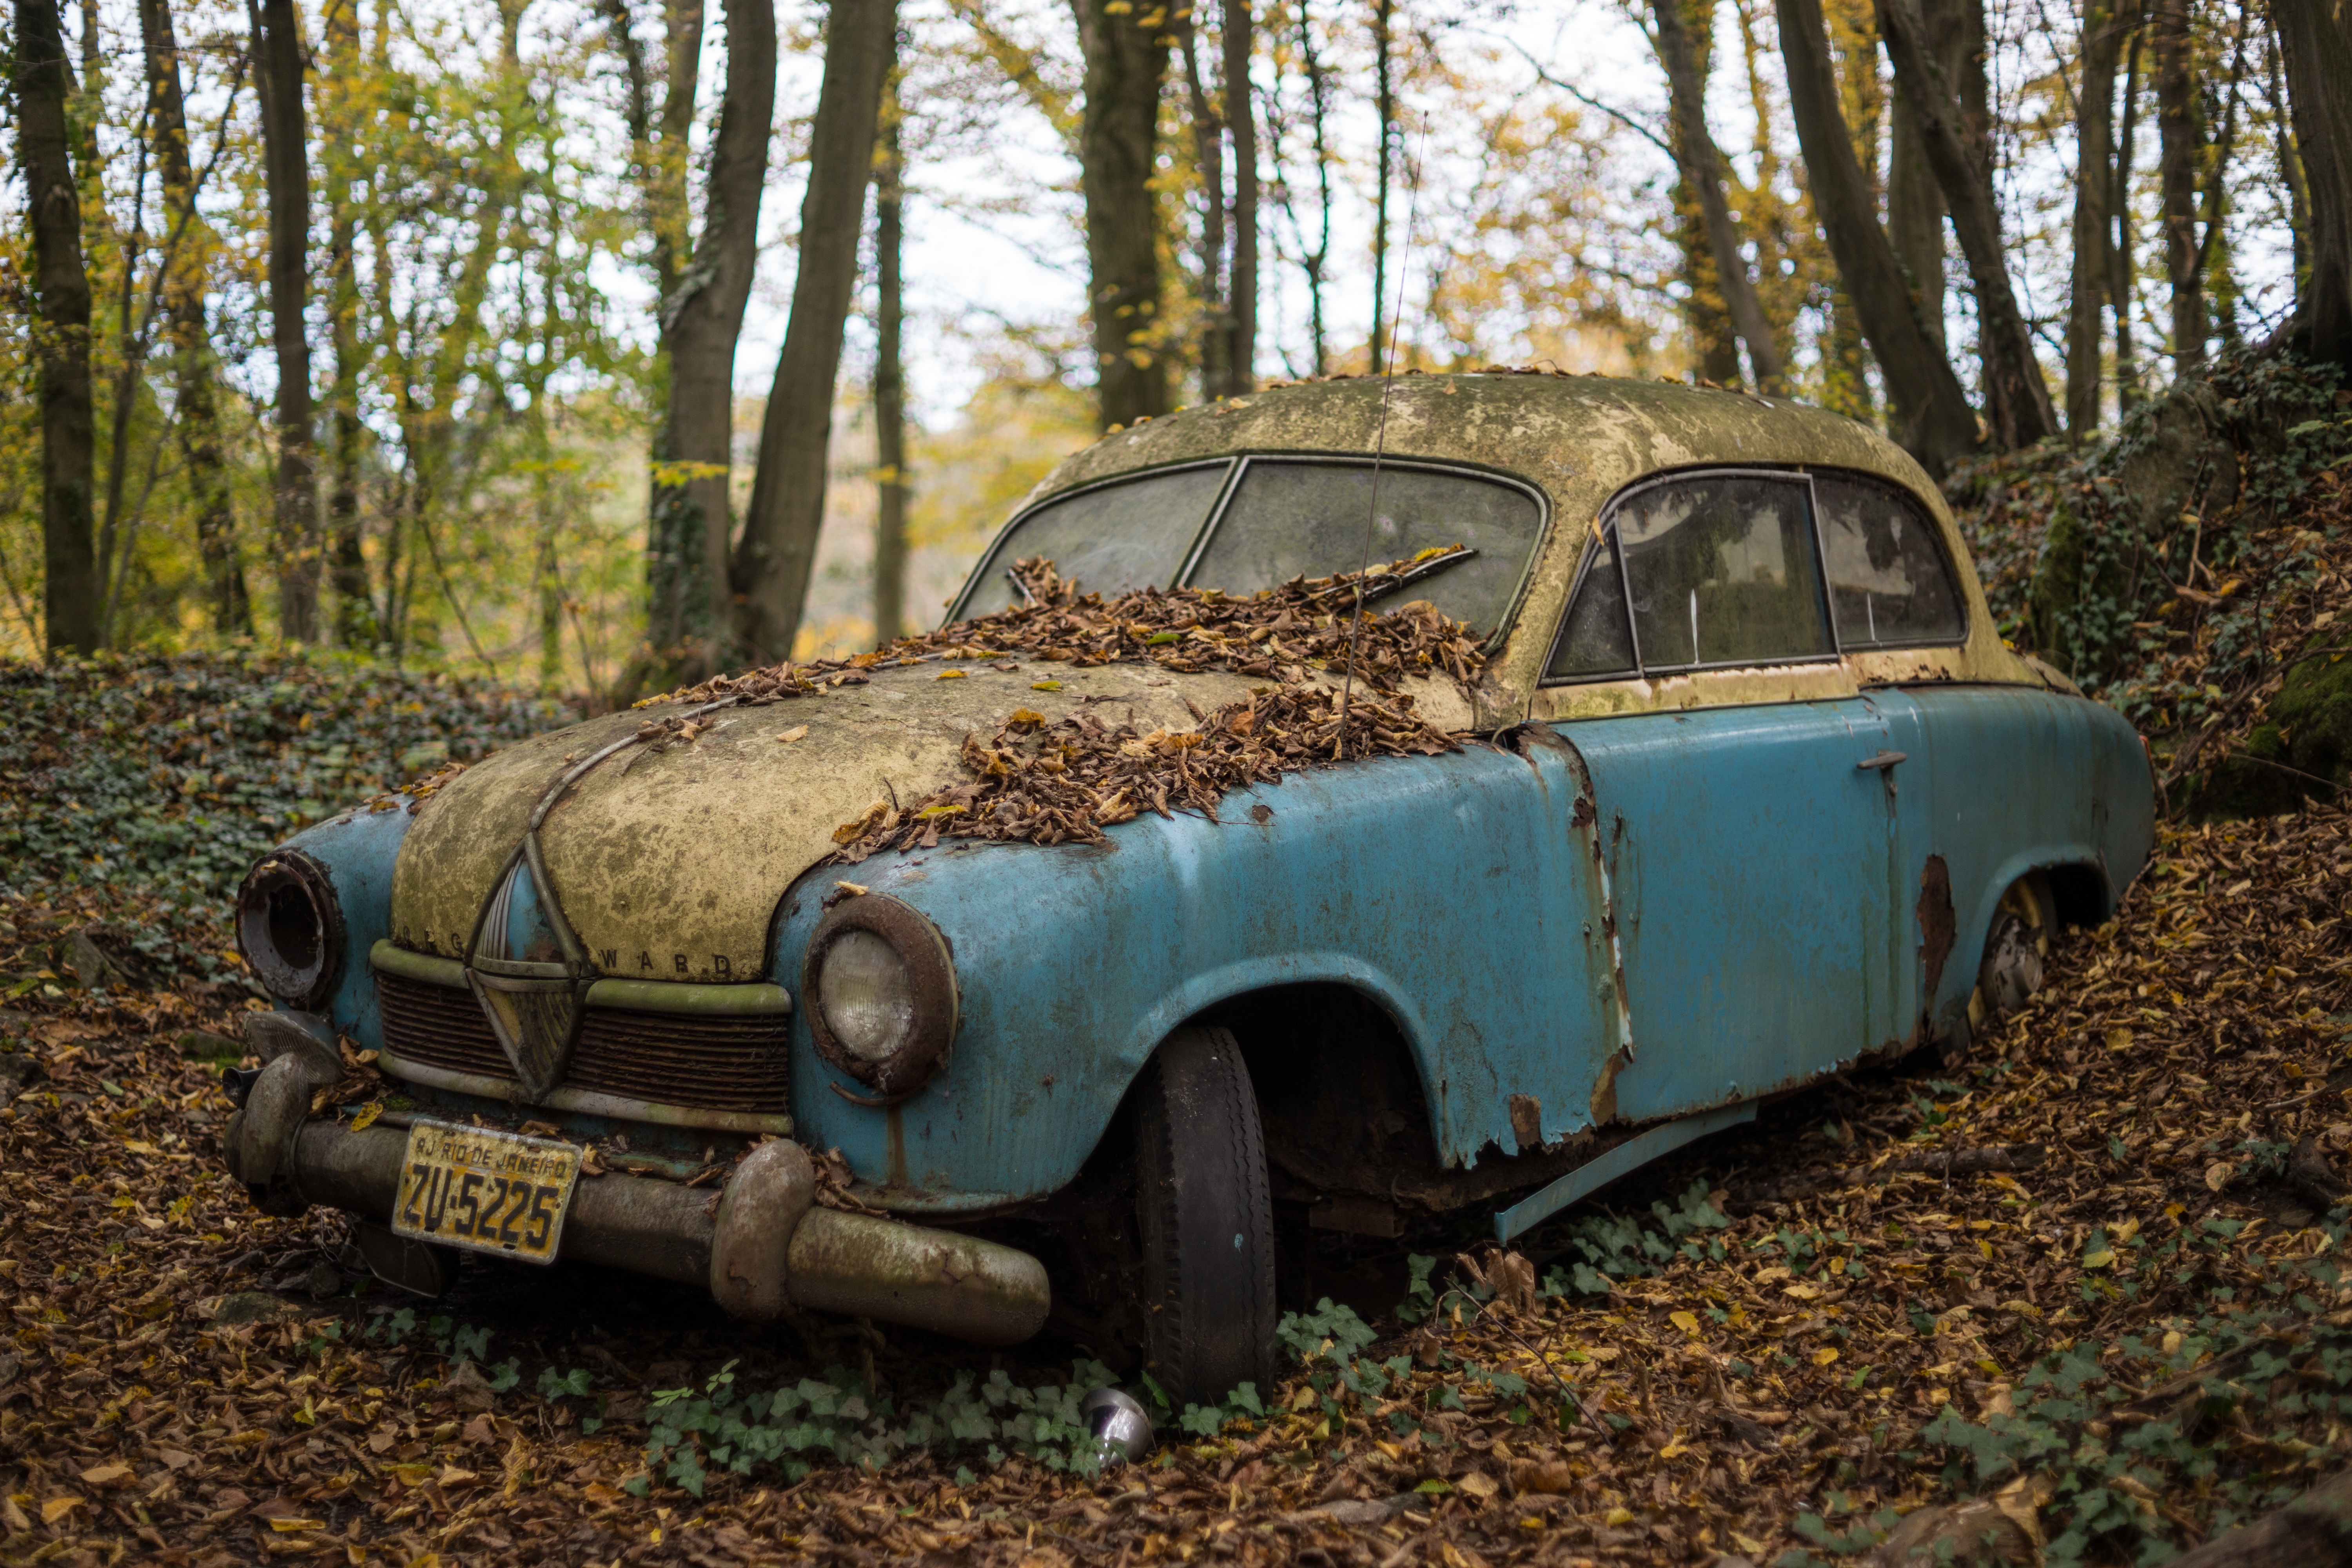 An abandoned old car